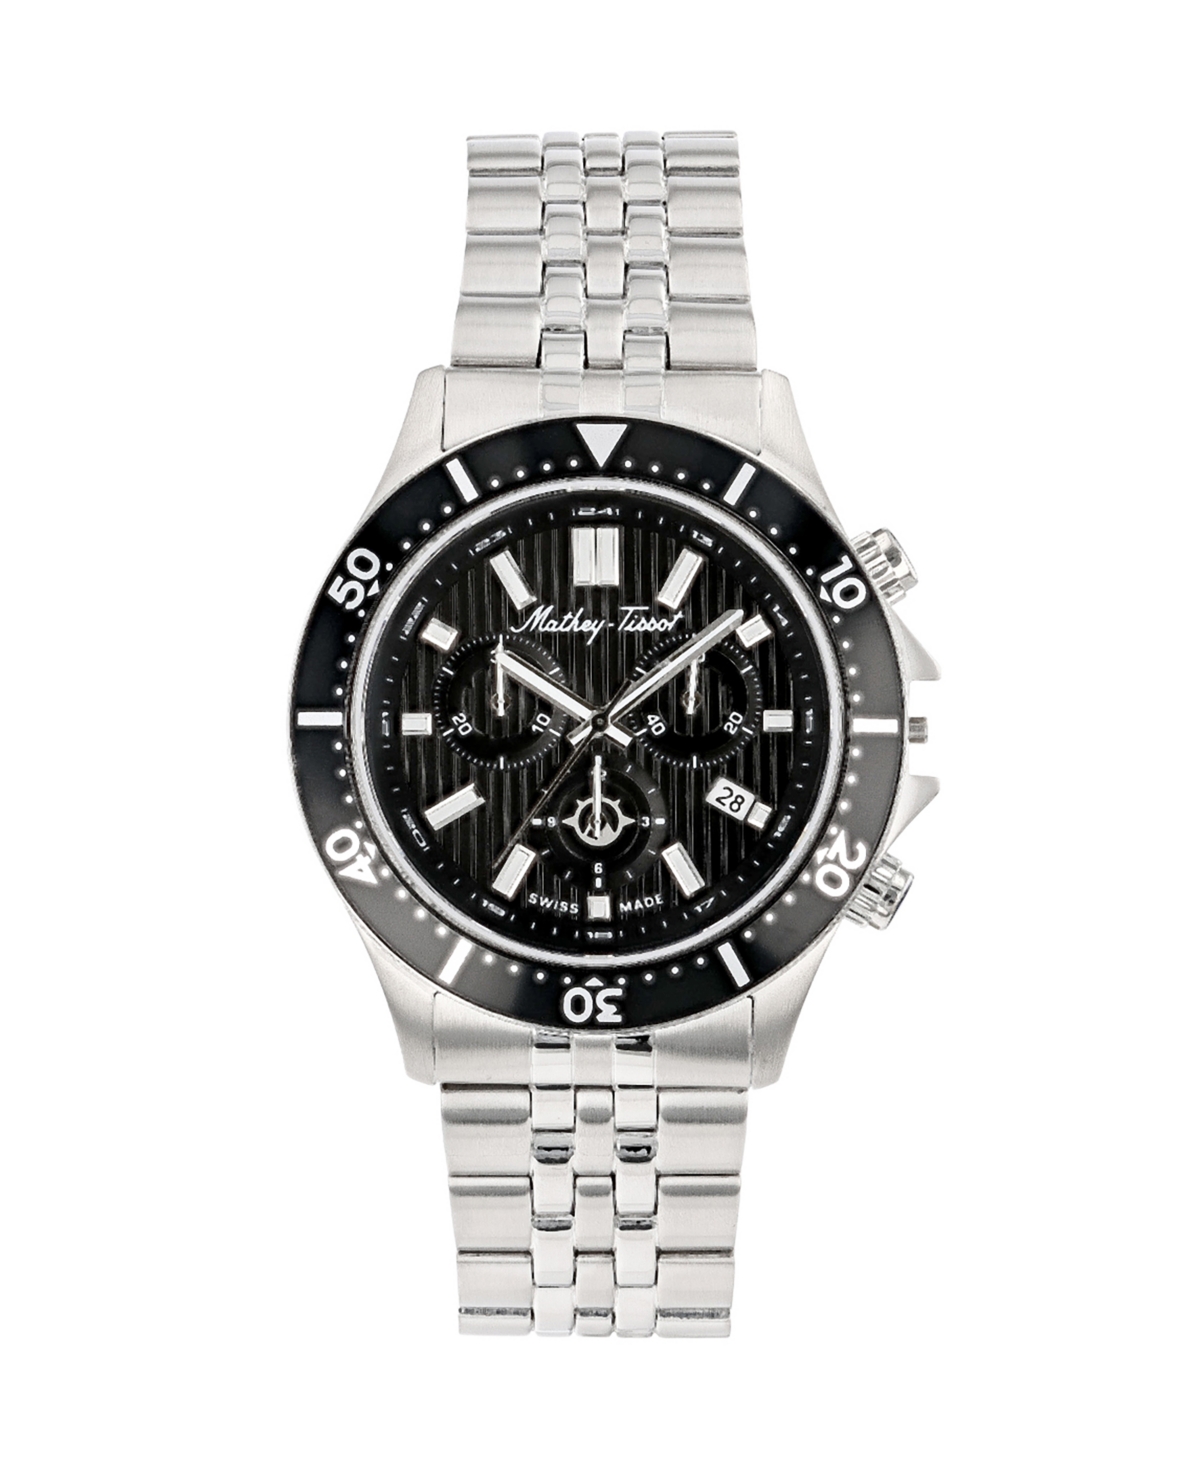 Men's Expedition Chronograph Collection Stainless Steel Bracelet Watch, 43mm - Silver